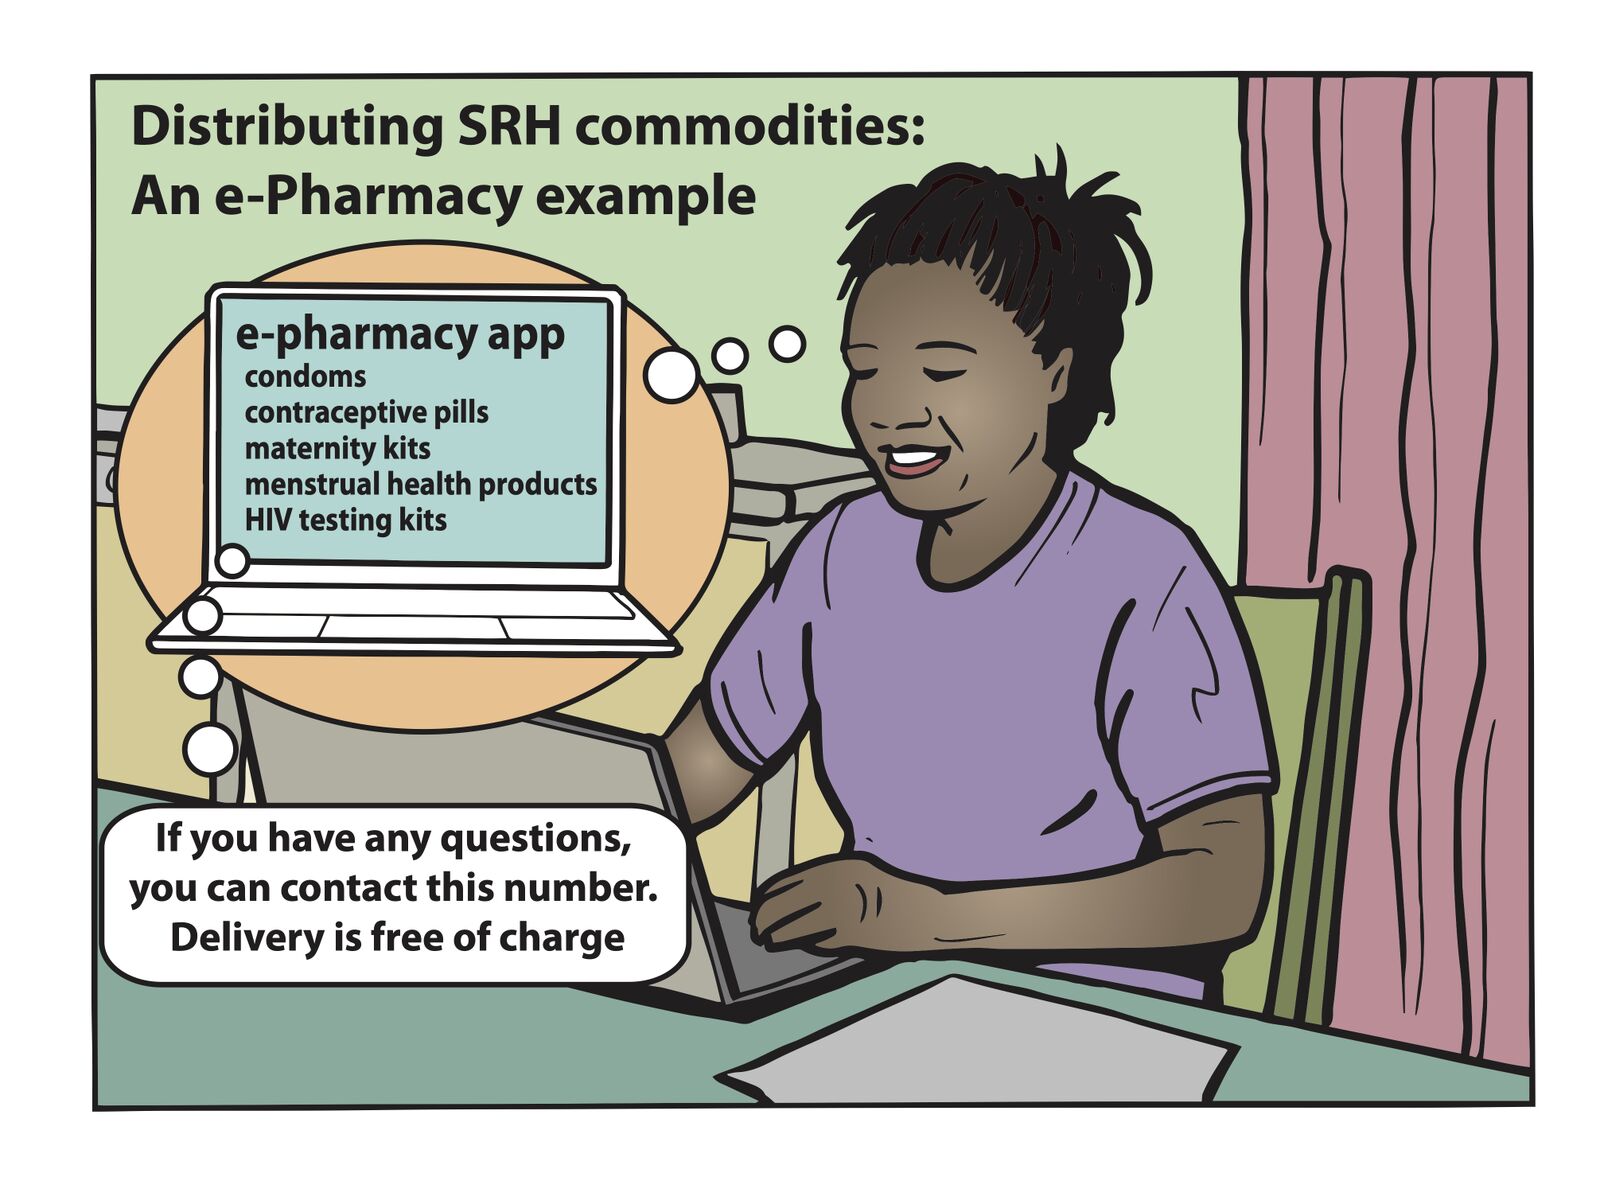 Distribution of SRH commodities during the COVID-19 pandemic